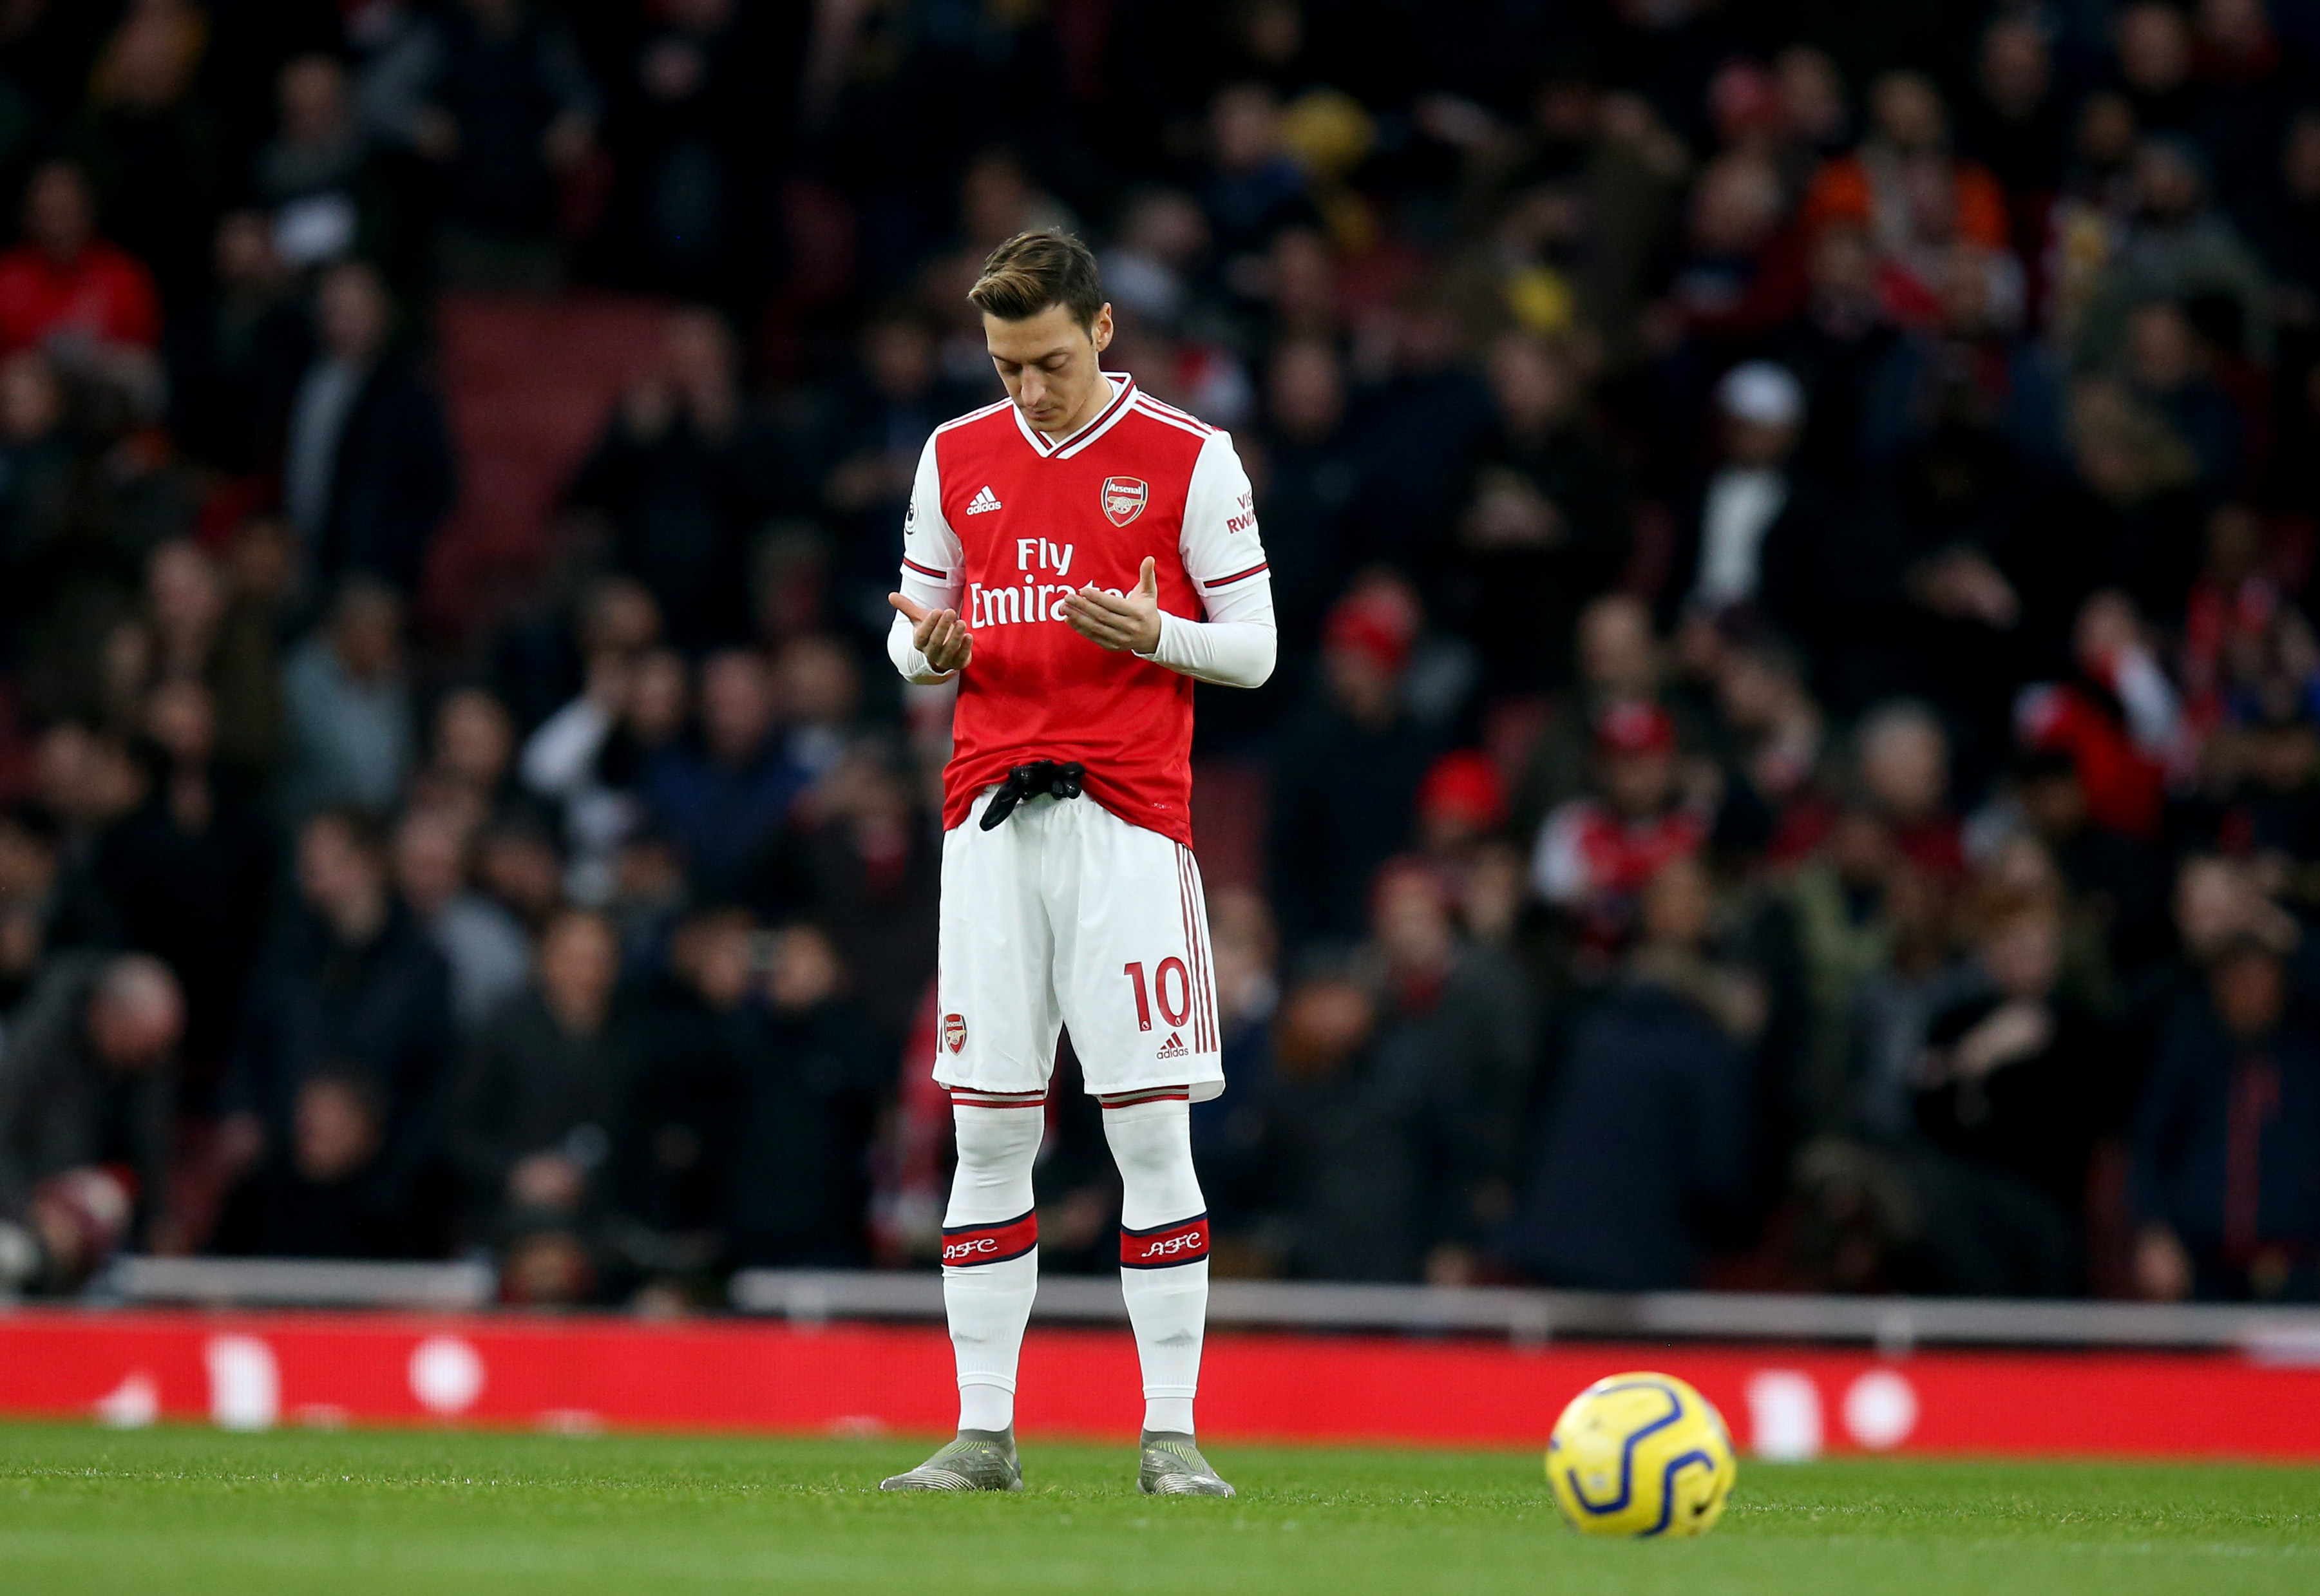 Farewell Mesut Özil - a signing that changed it all